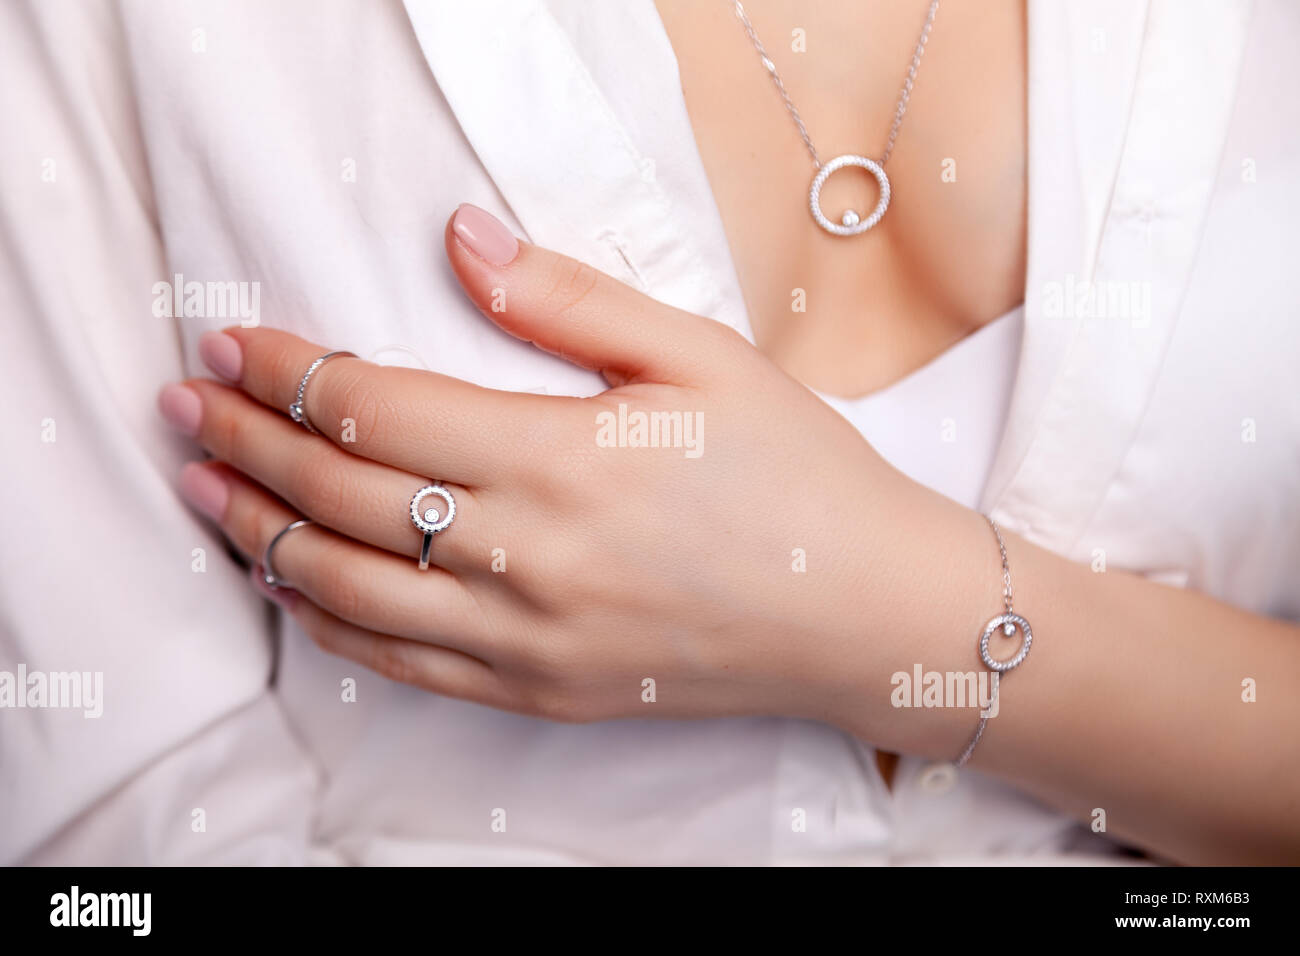 Romantic Ladies Wedding Jewelry Gift Luxury Female Finger Ring Jewelry  Simple Fashion Leaves 925 Sterling Silver Rings for Women - China Women  Jewelry and Jewelry price | Made-in-China.com